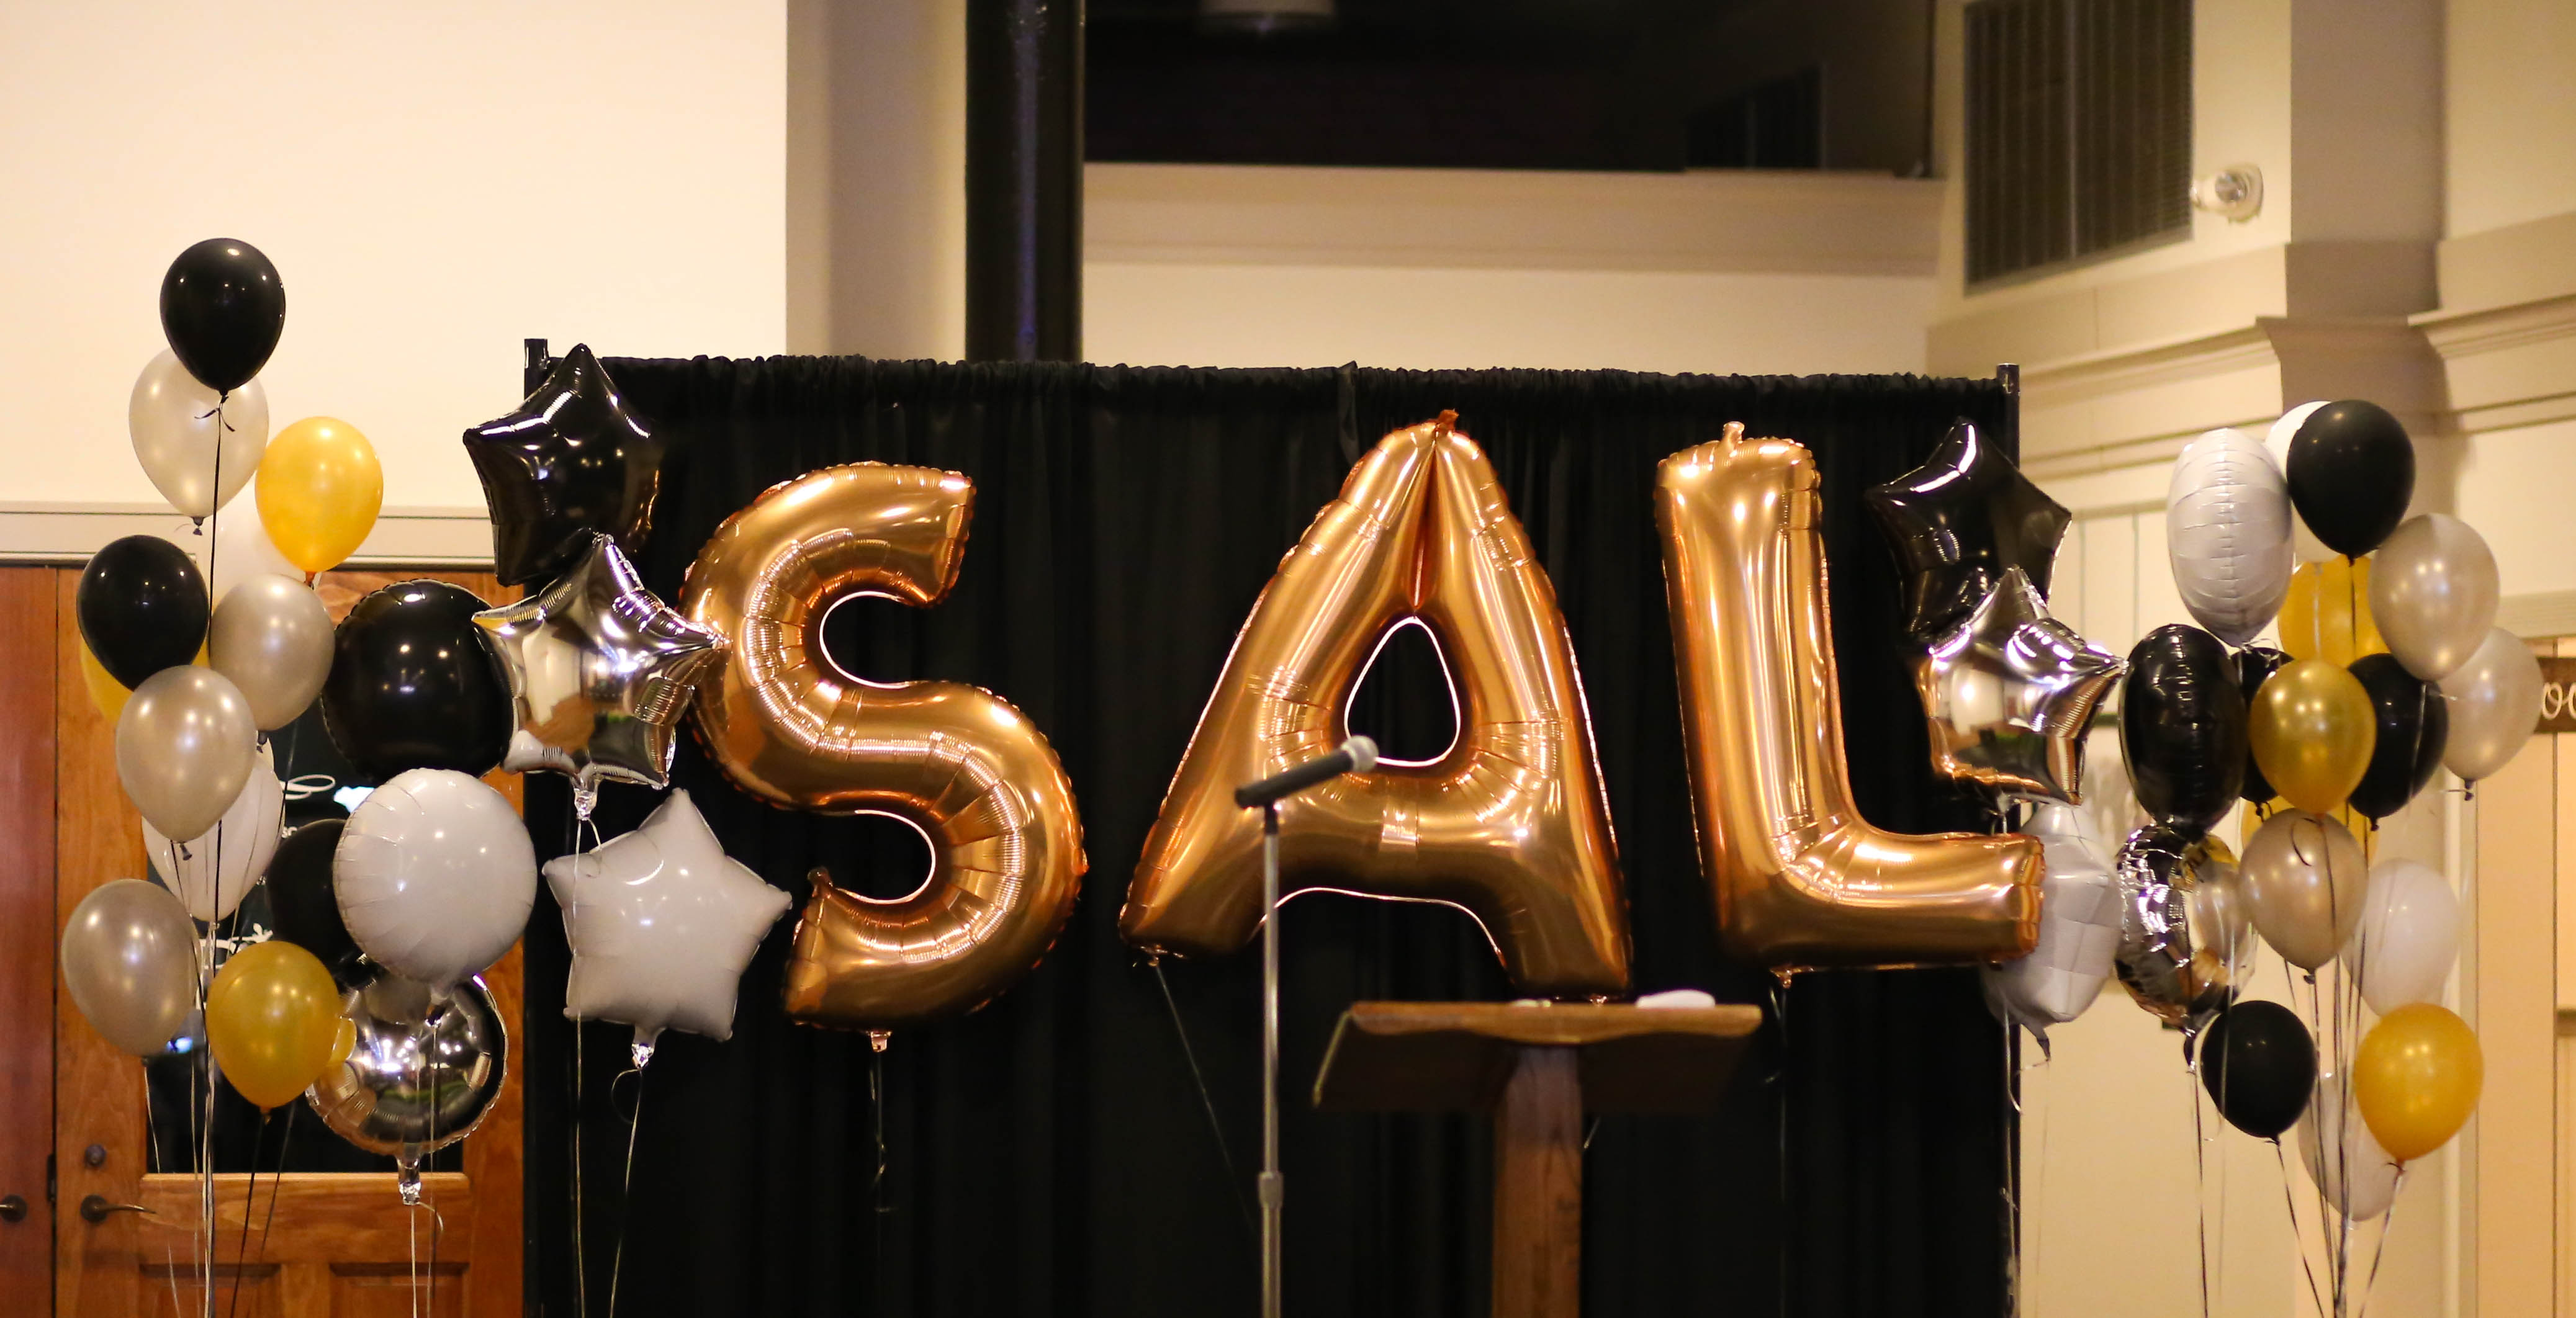 SAL Awards Recognize Students, Organizations